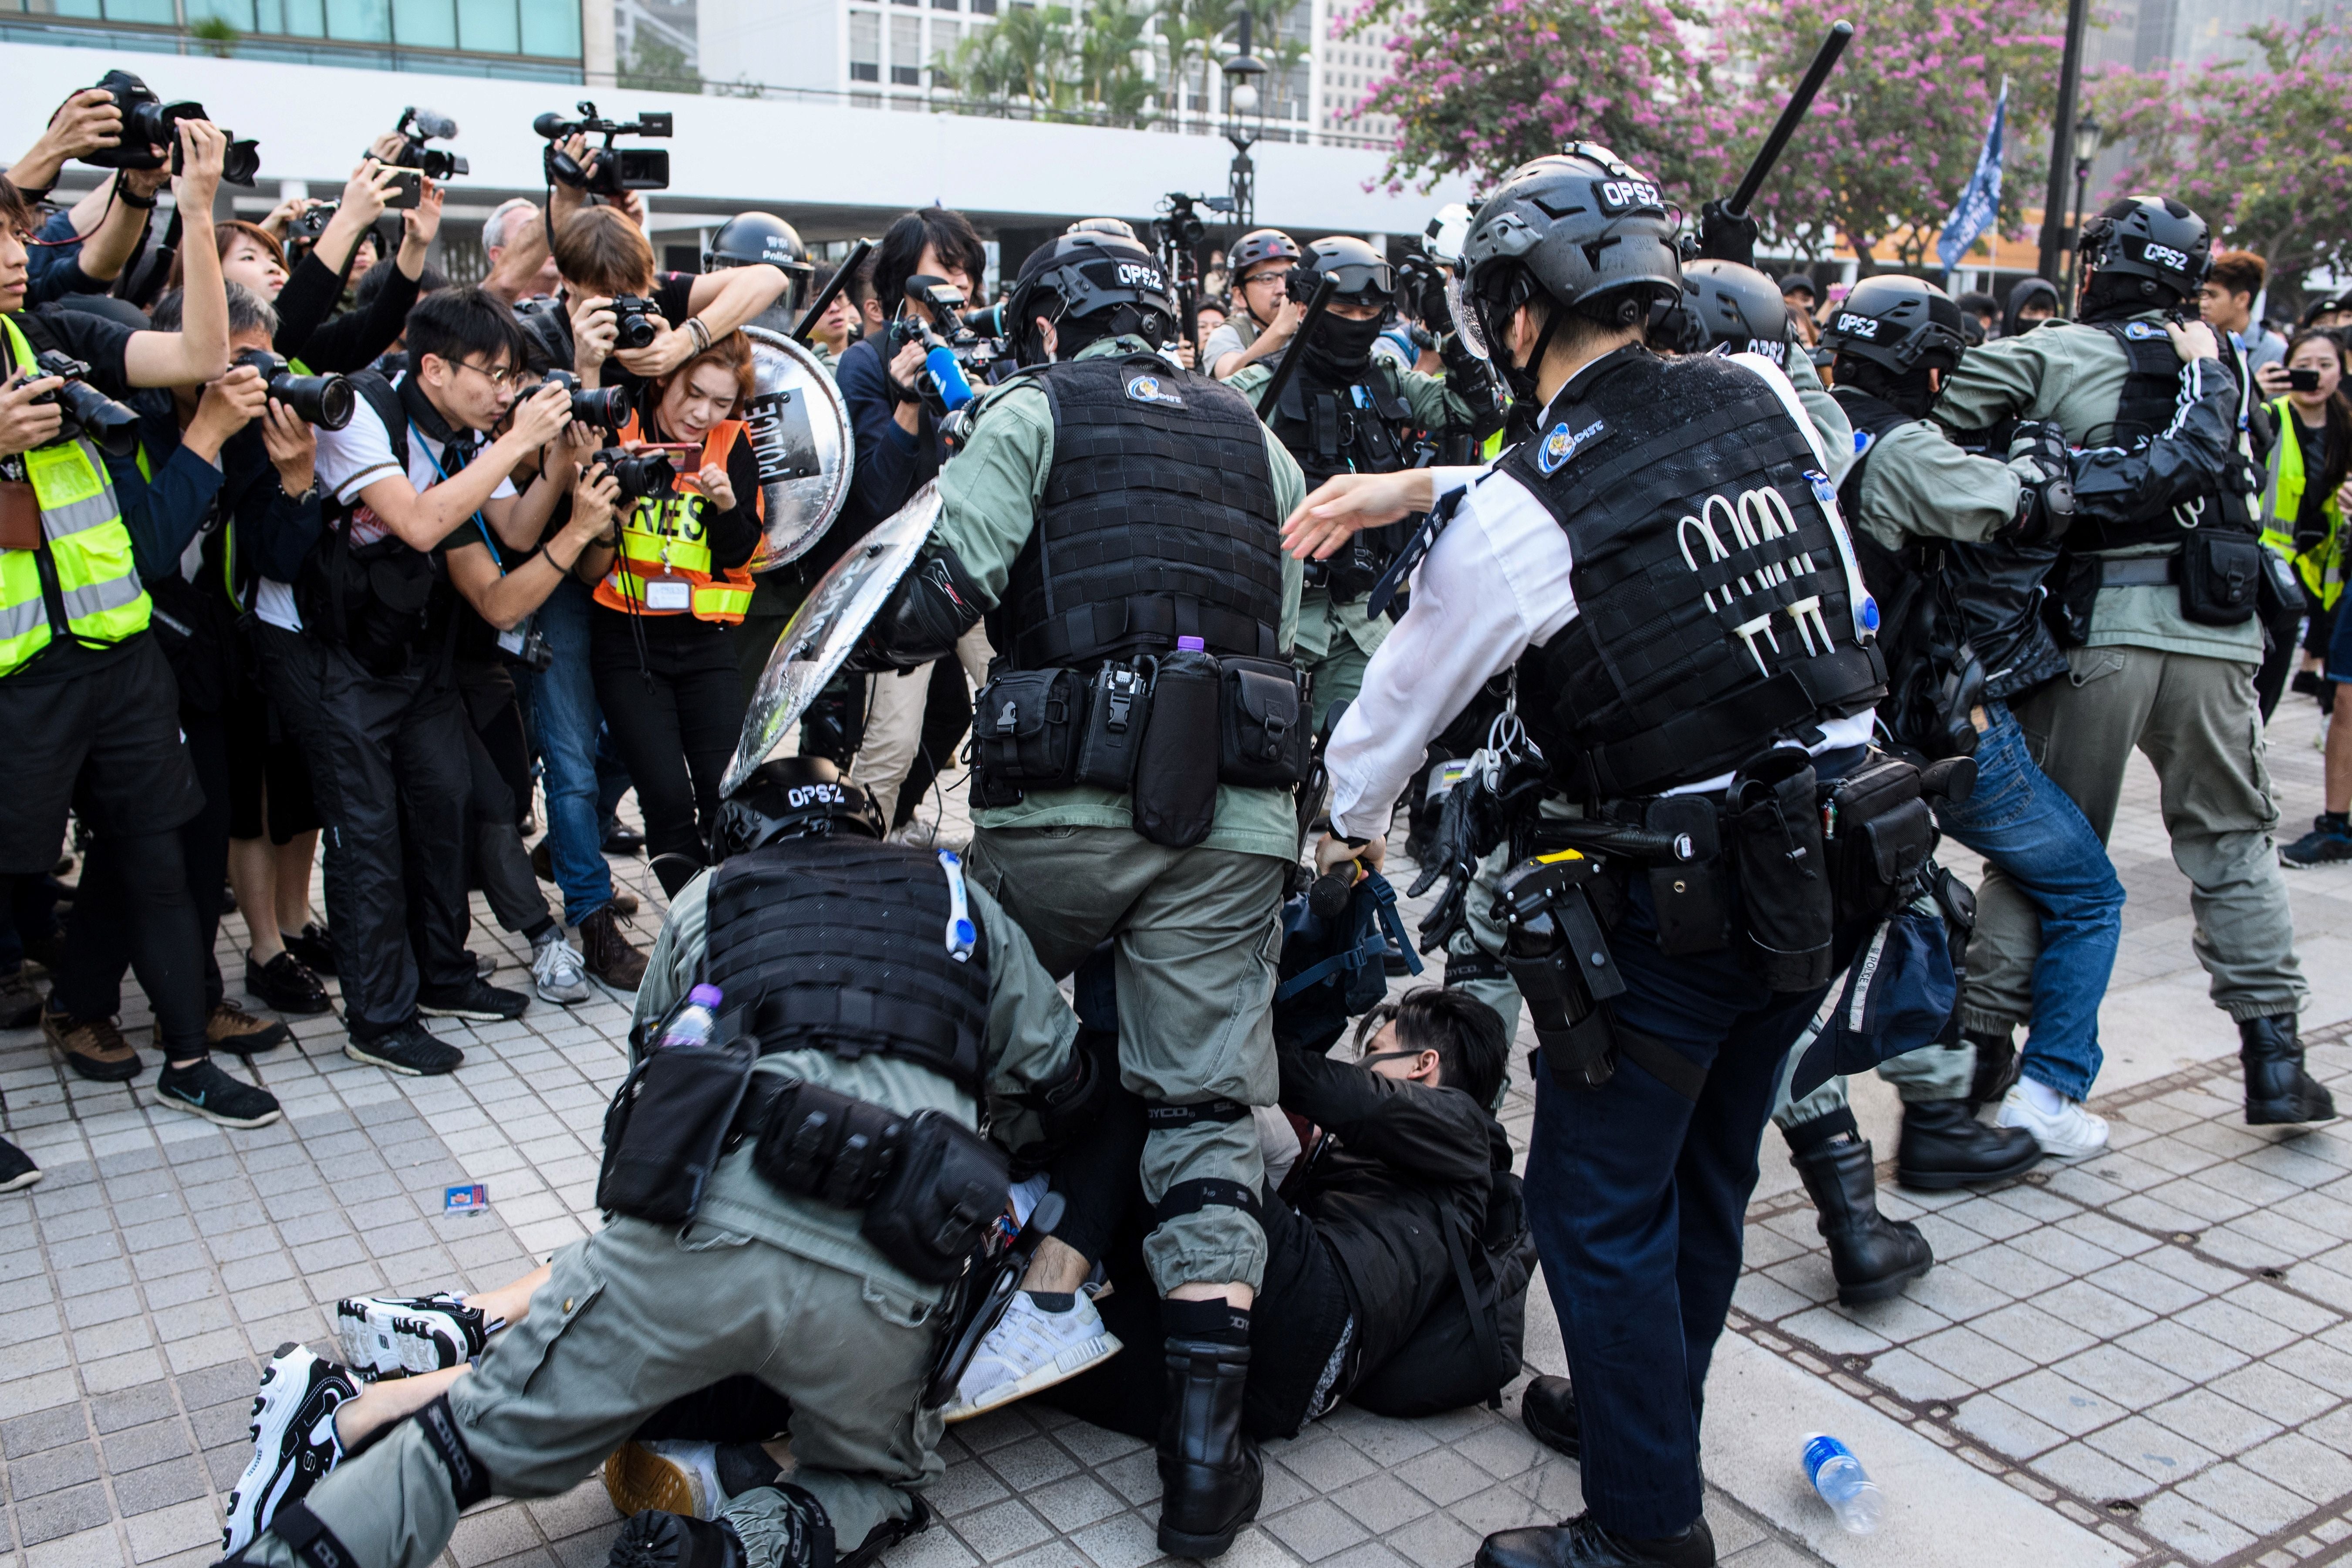 Police detain a man during a rally in Hong Kong on 22 December 2019 to show support for the Uighur minority in China.